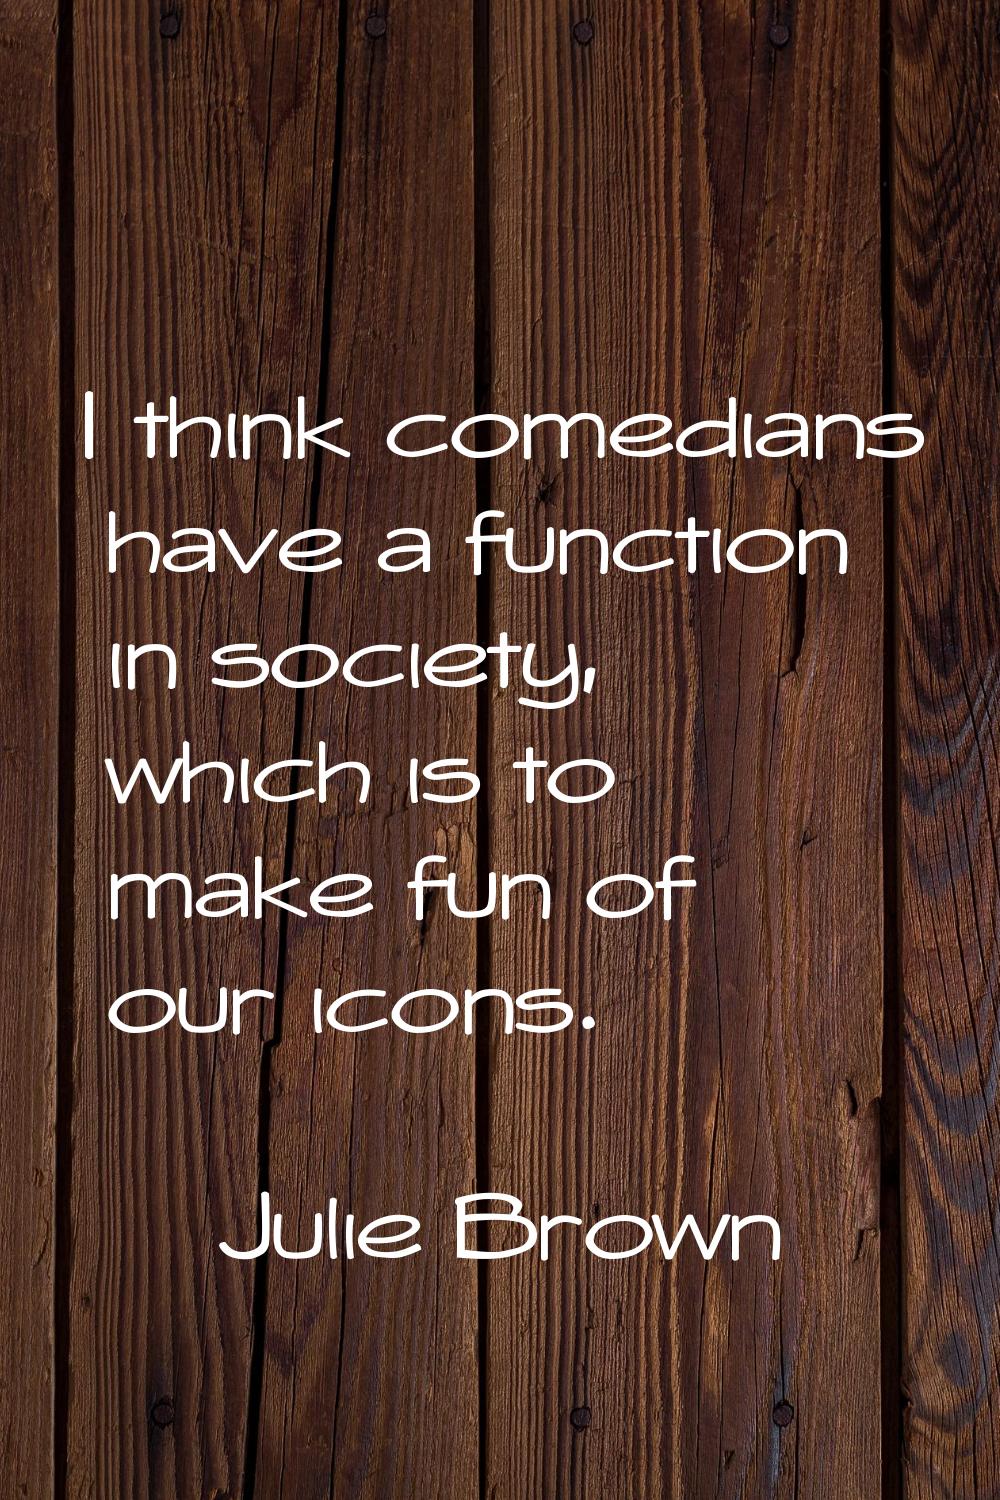 I think comedians have a function in society, which is to make fun of our icons.